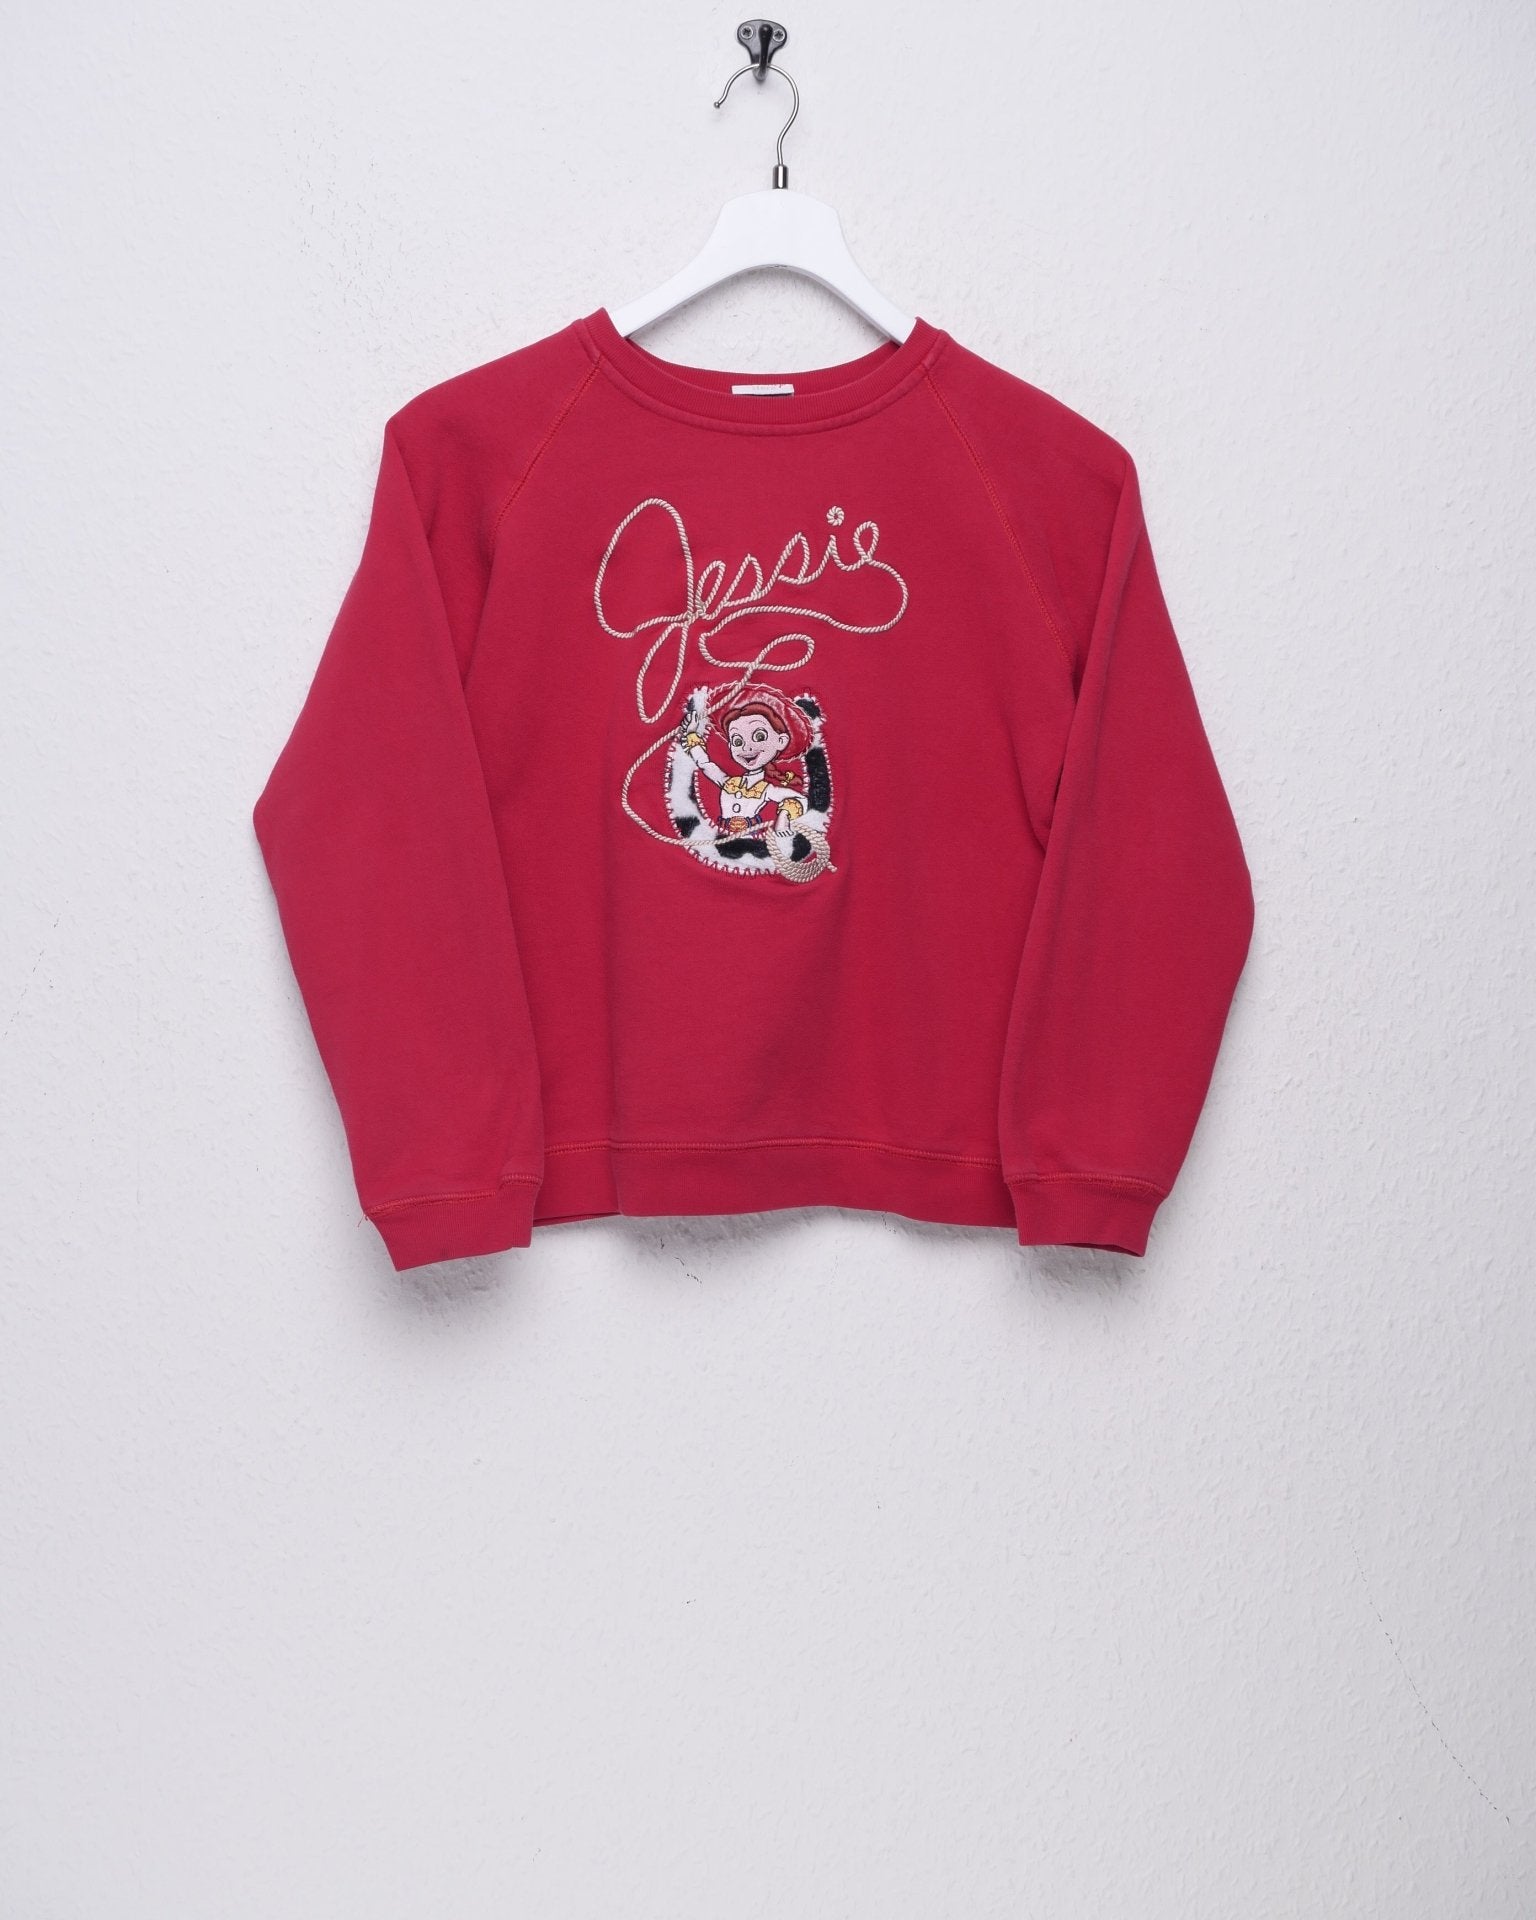 Disney embroidered 'Jessie' washed cropped Vintage Sweater - Peeces